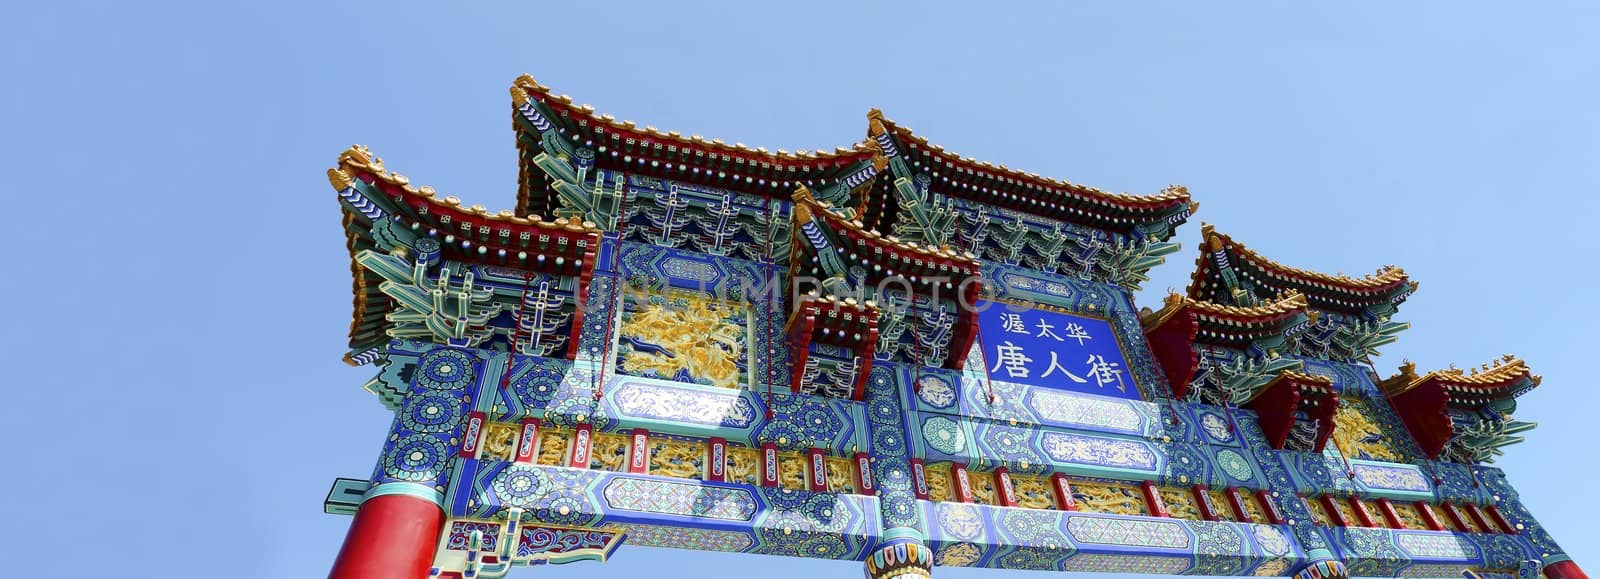 The gateway to Ottawa's Chinatown with beautiful colors and a blue sky.